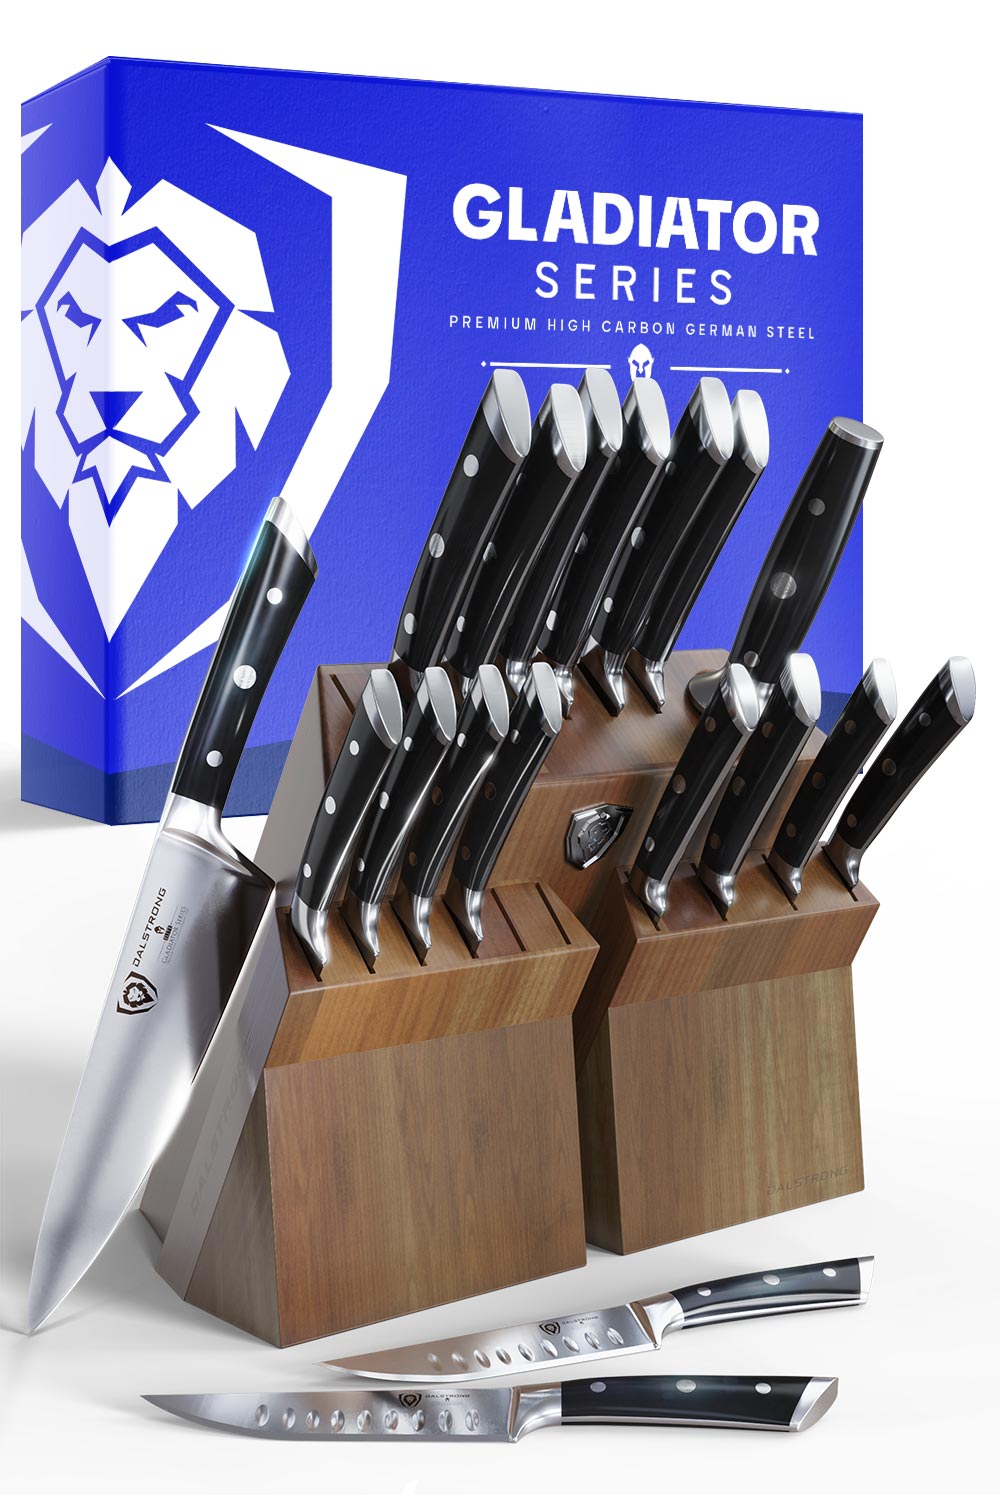 Dalstrong gladiator series 18 piece colossal knife set with black handles and block in front of it's premium packaging.